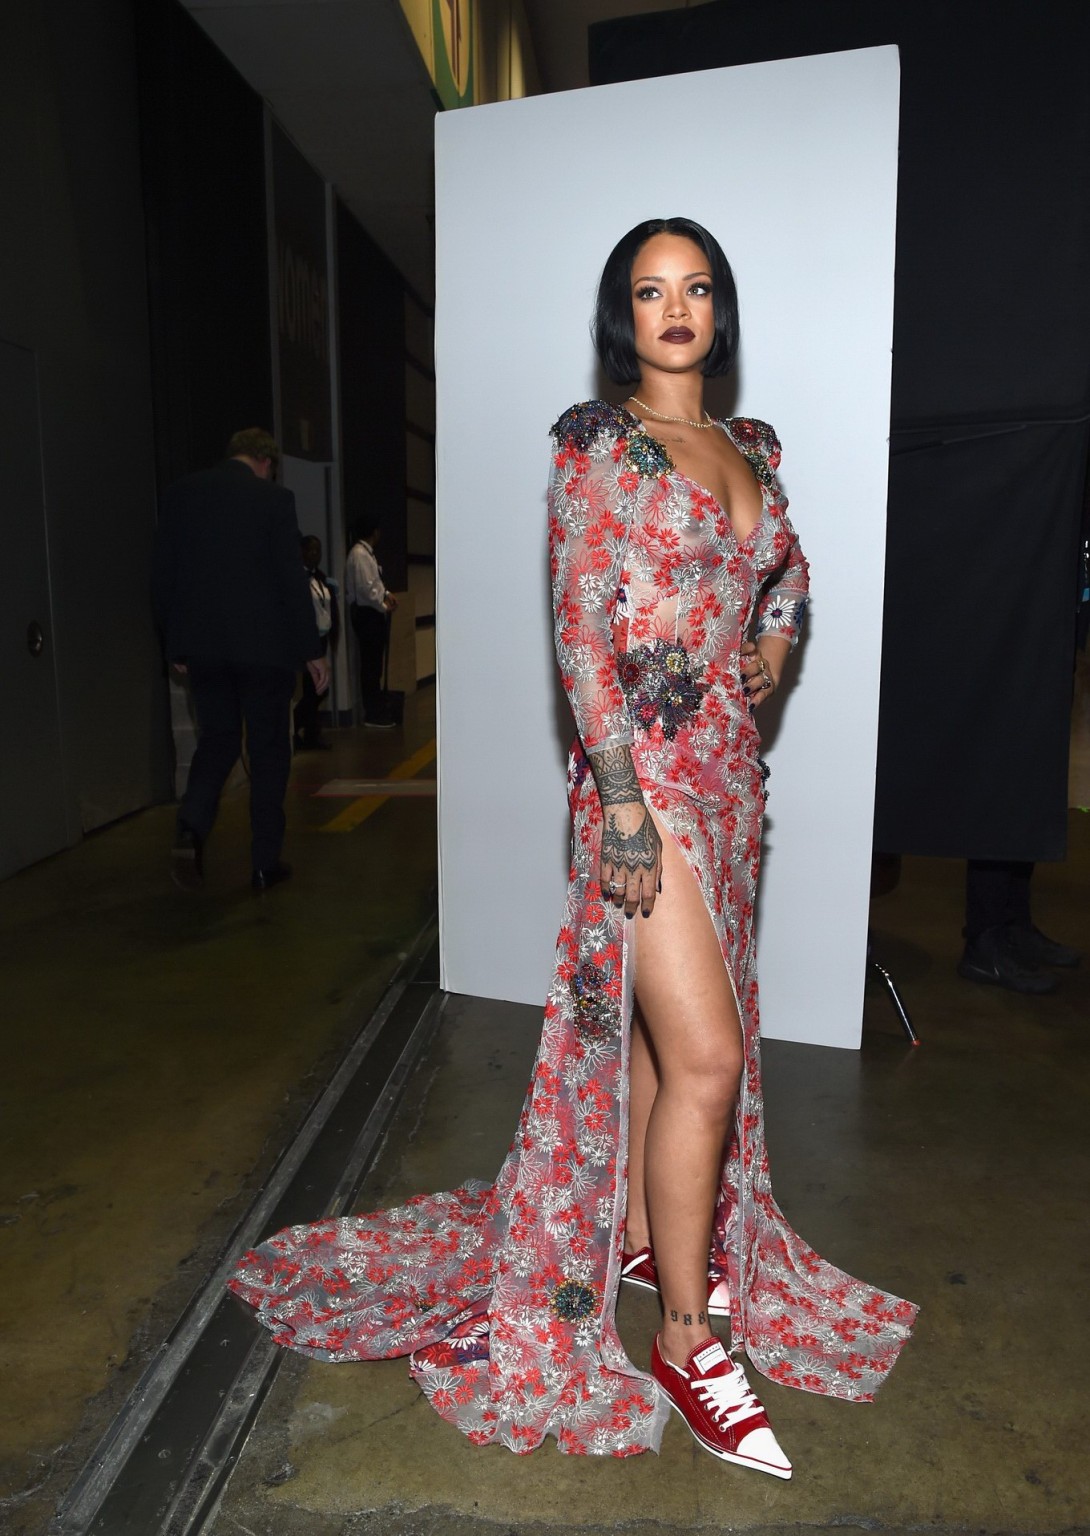 Rihanna seethru to boobs and panties at the event in LA #75146046